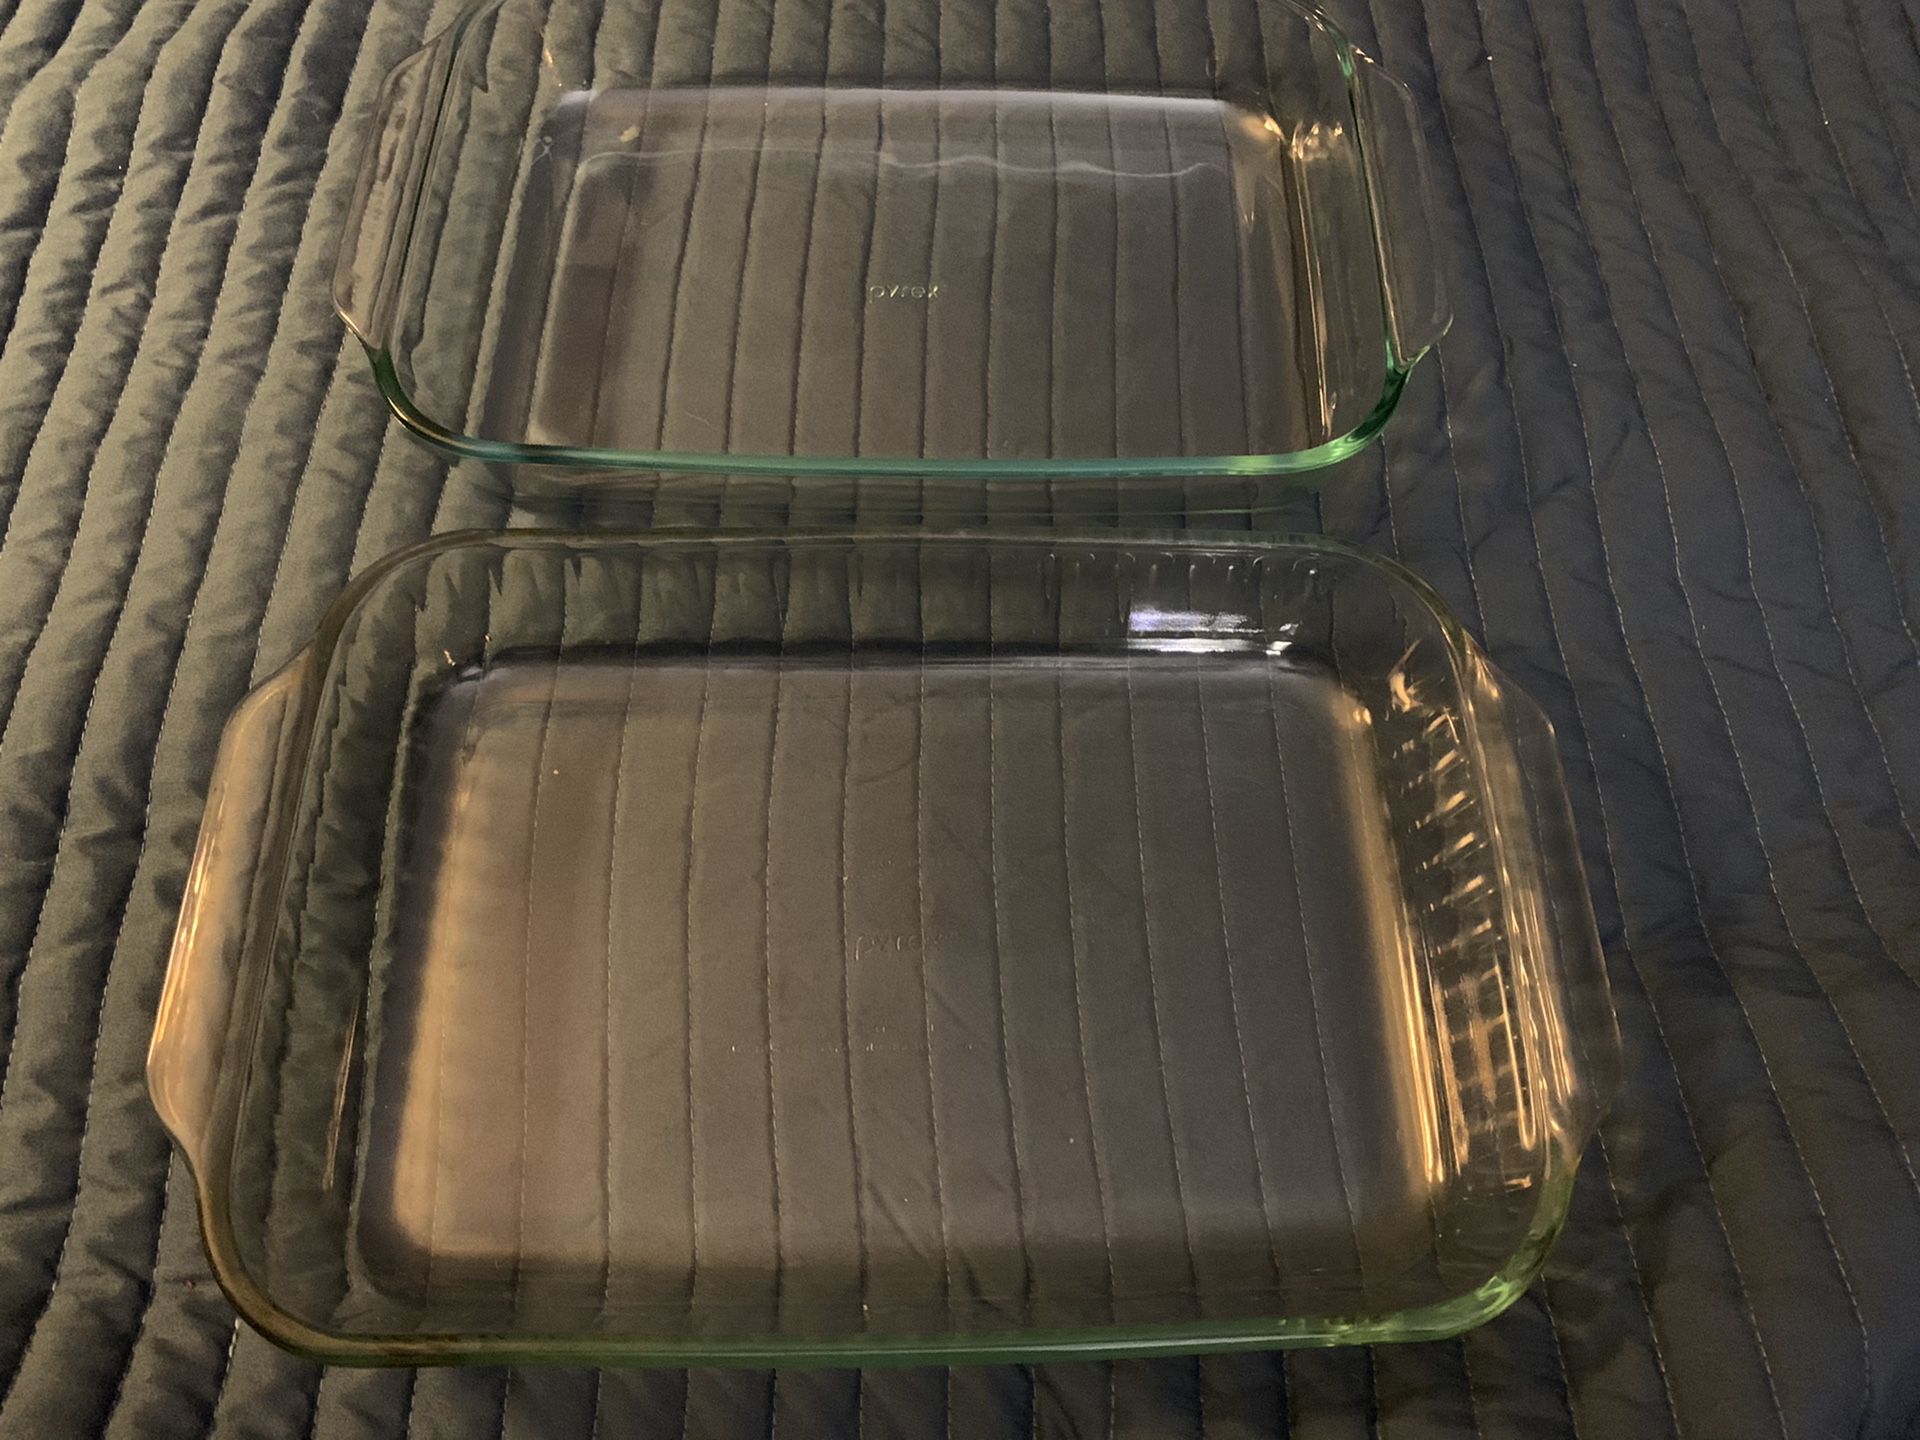 Lot of 2 Pyrex 9 x 13 Clear Glass Baking Pans